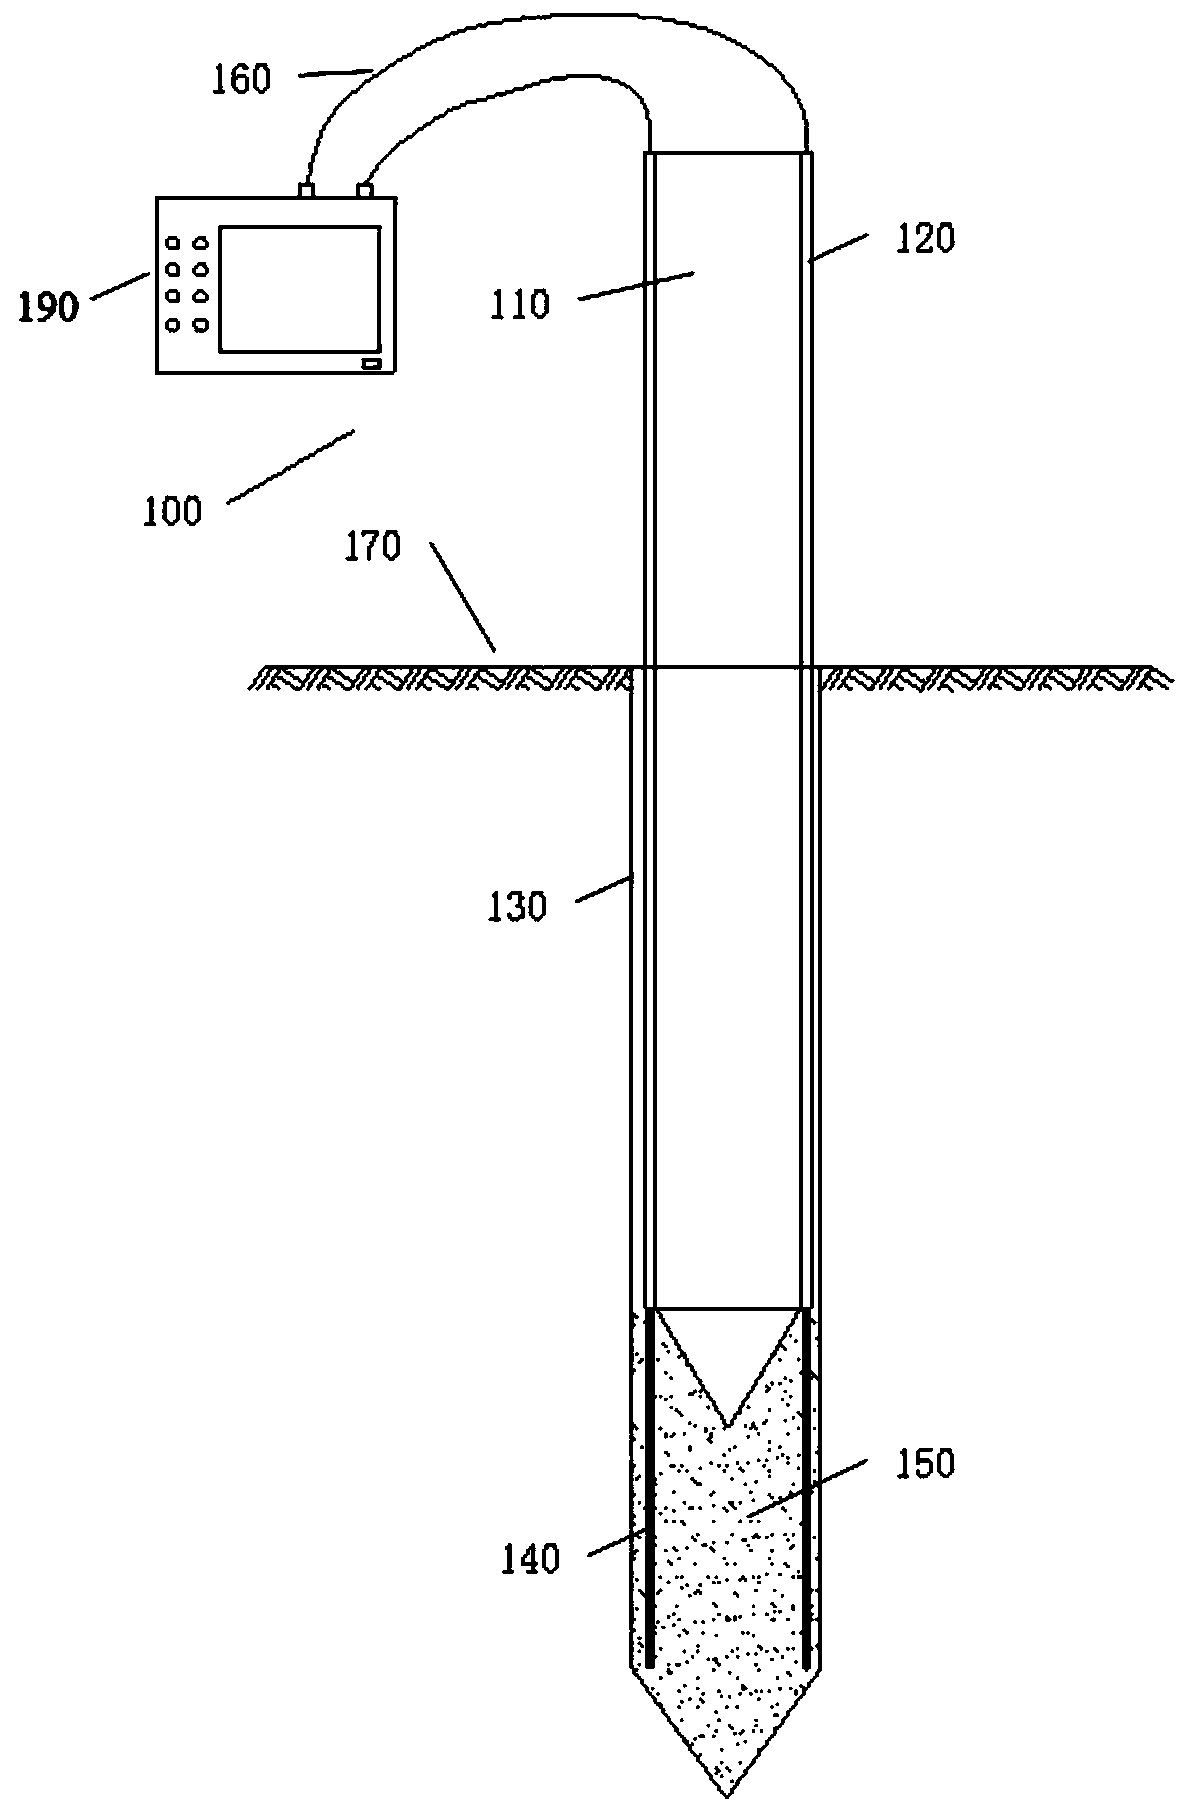 Real-time monitoring system and method for sand pile construction quality